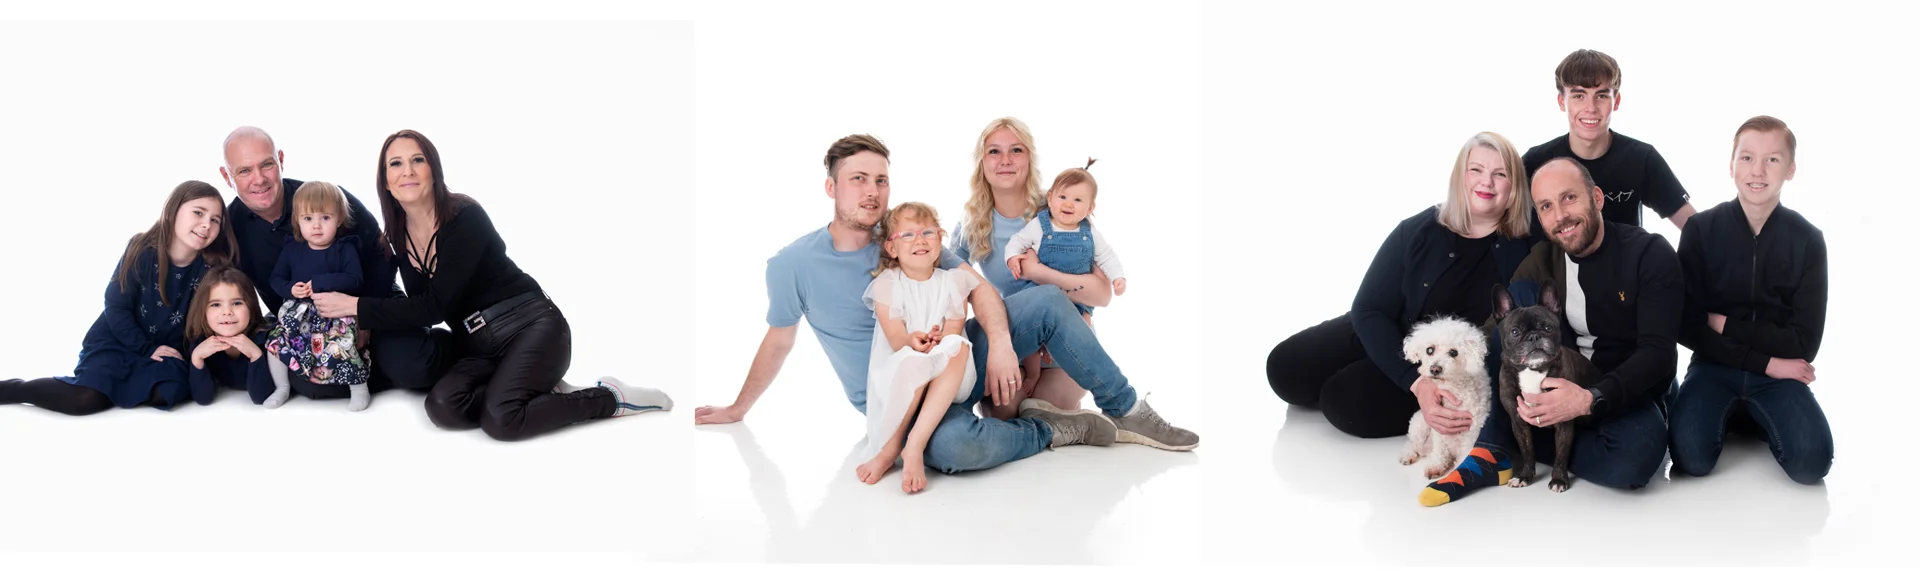 Three families posing in front of a white background.